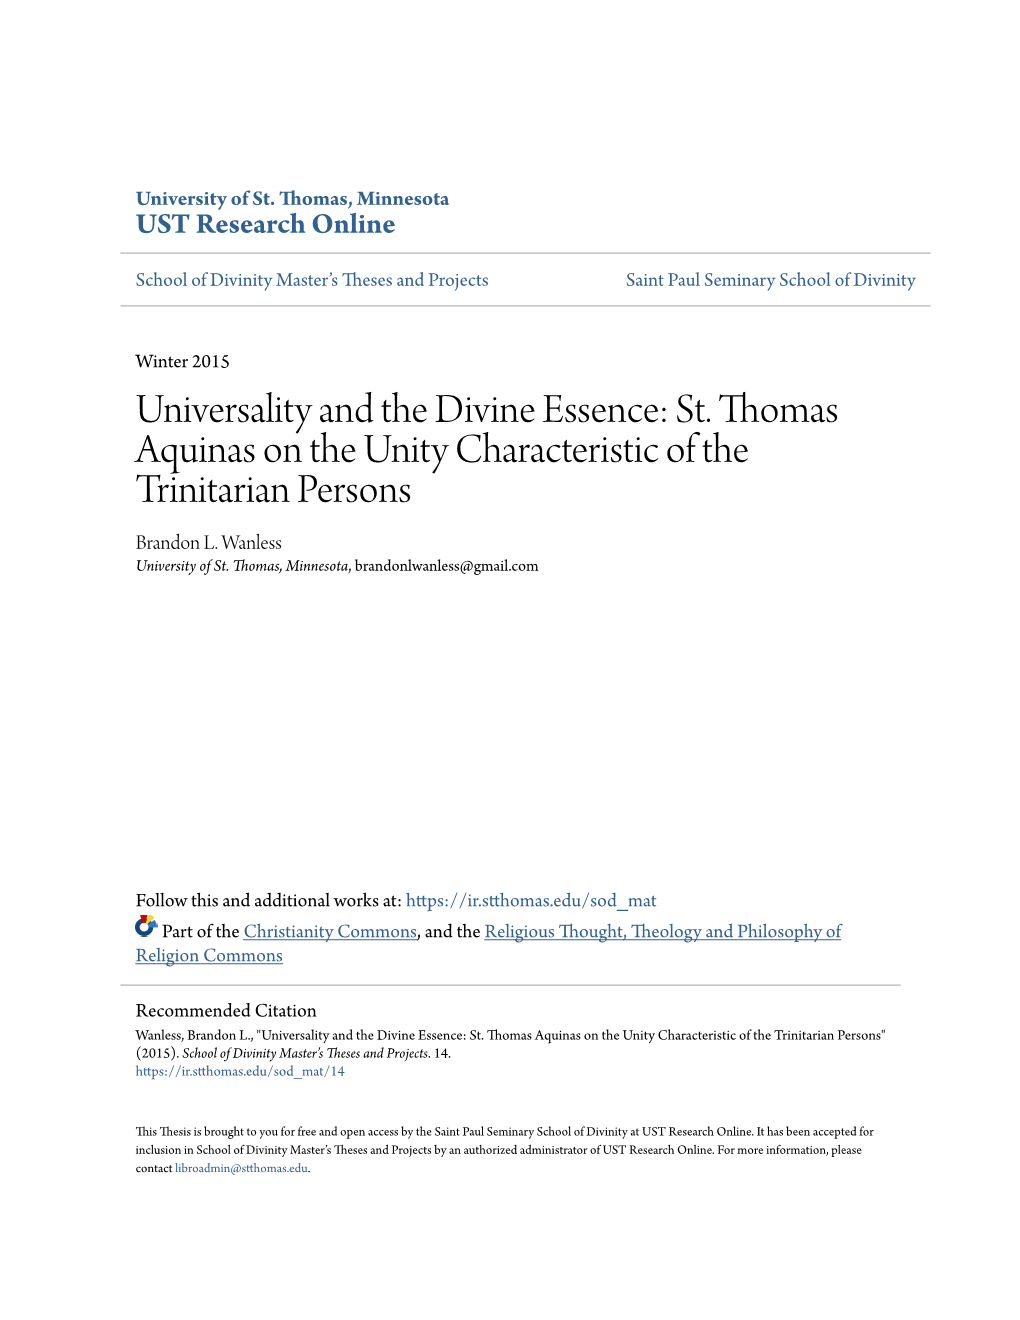 Universality and the Divine Essence: St